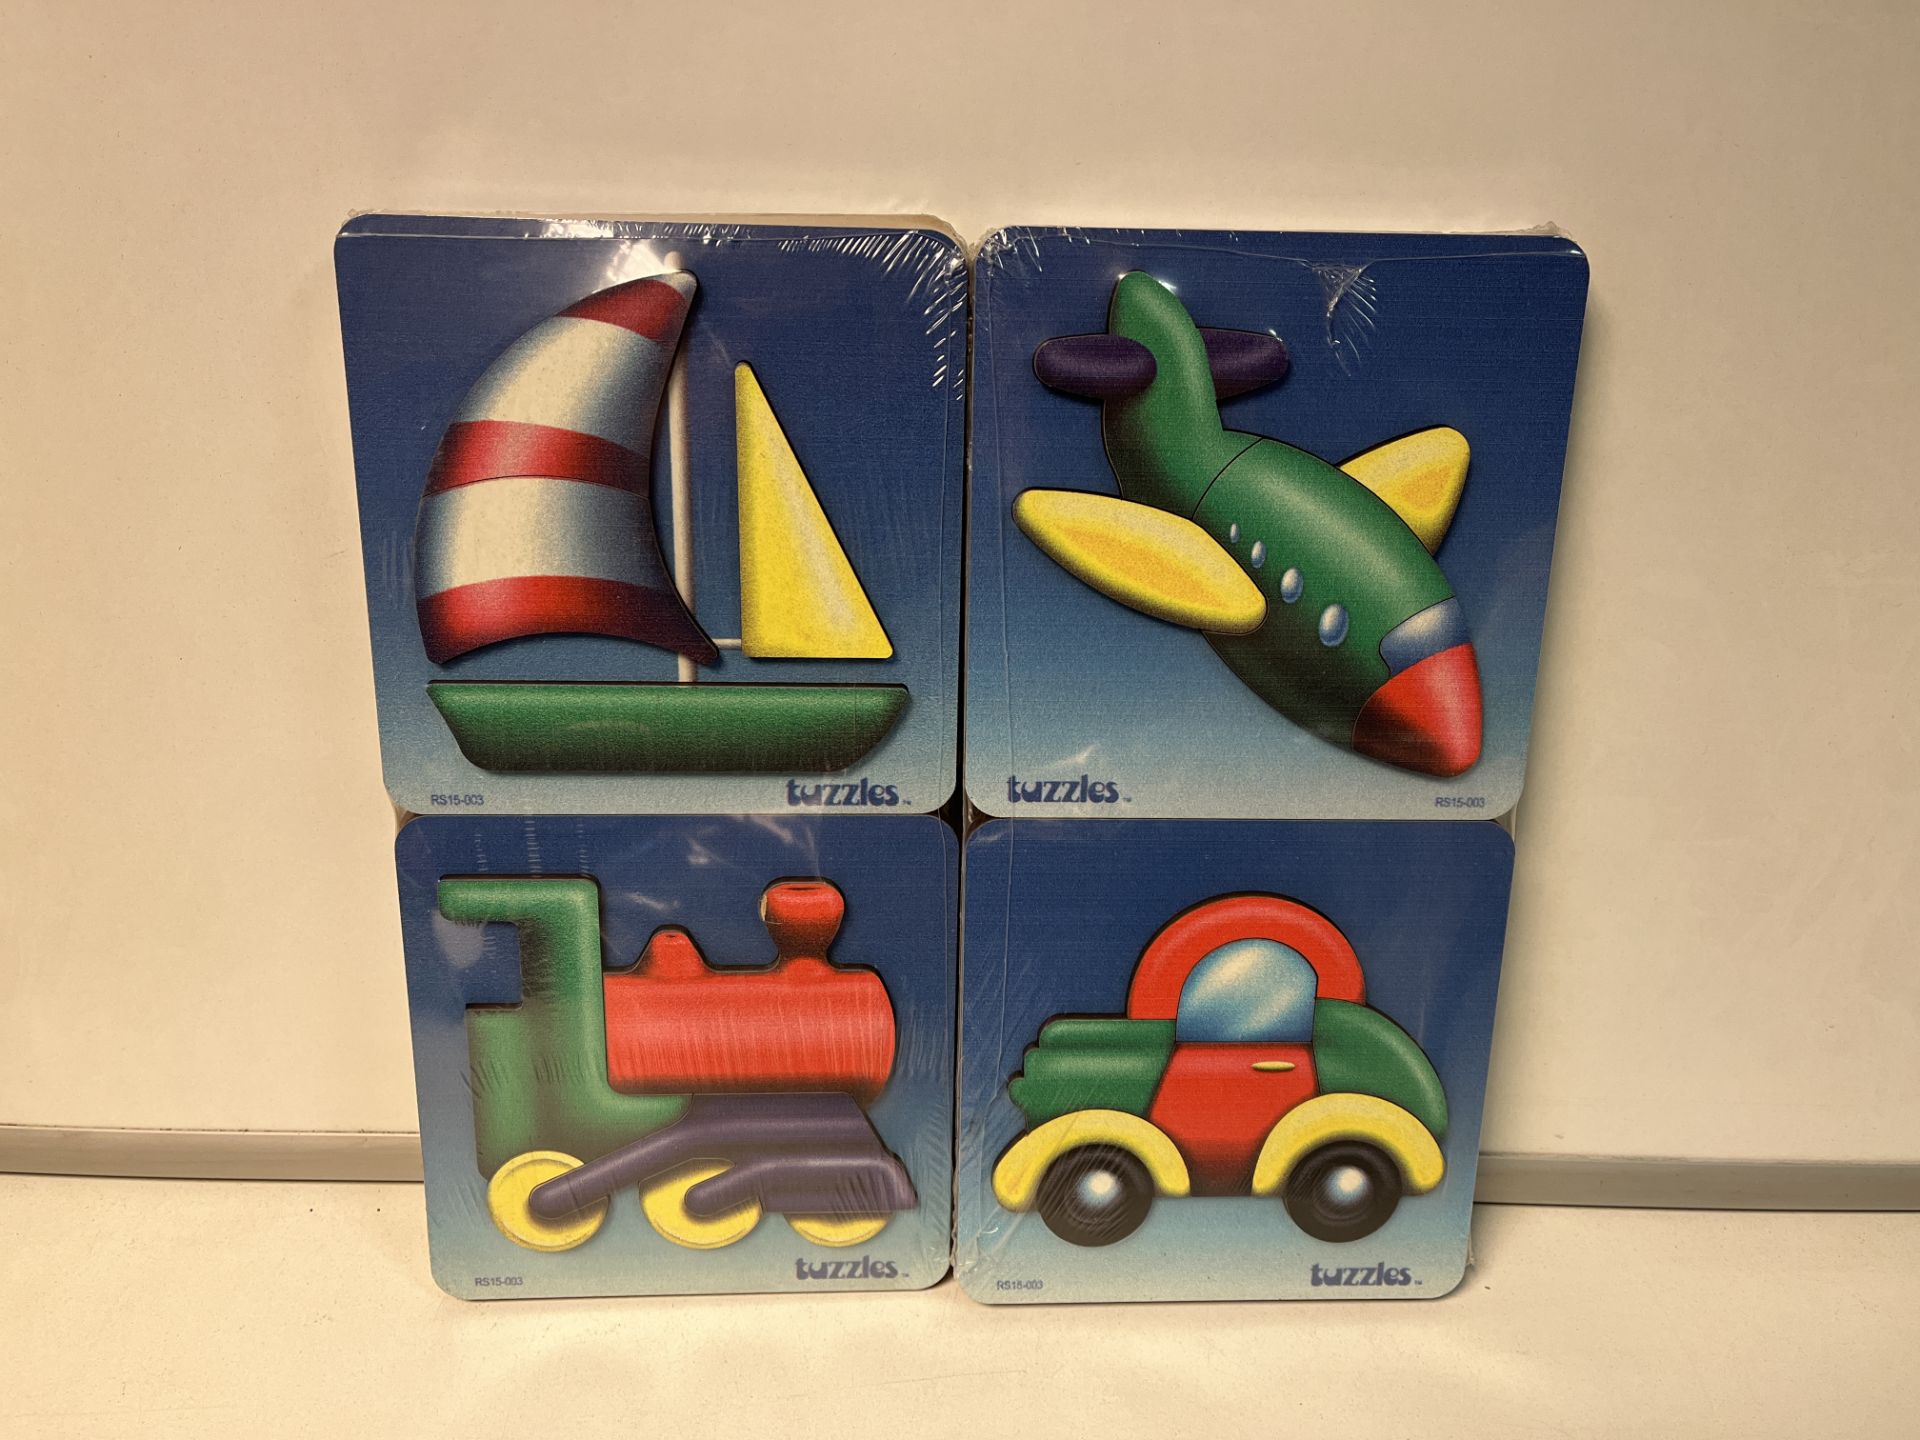 40 X BRAND NEW PACKS OF 4 WOODEN EDUCATIONAL PUZZLES R4